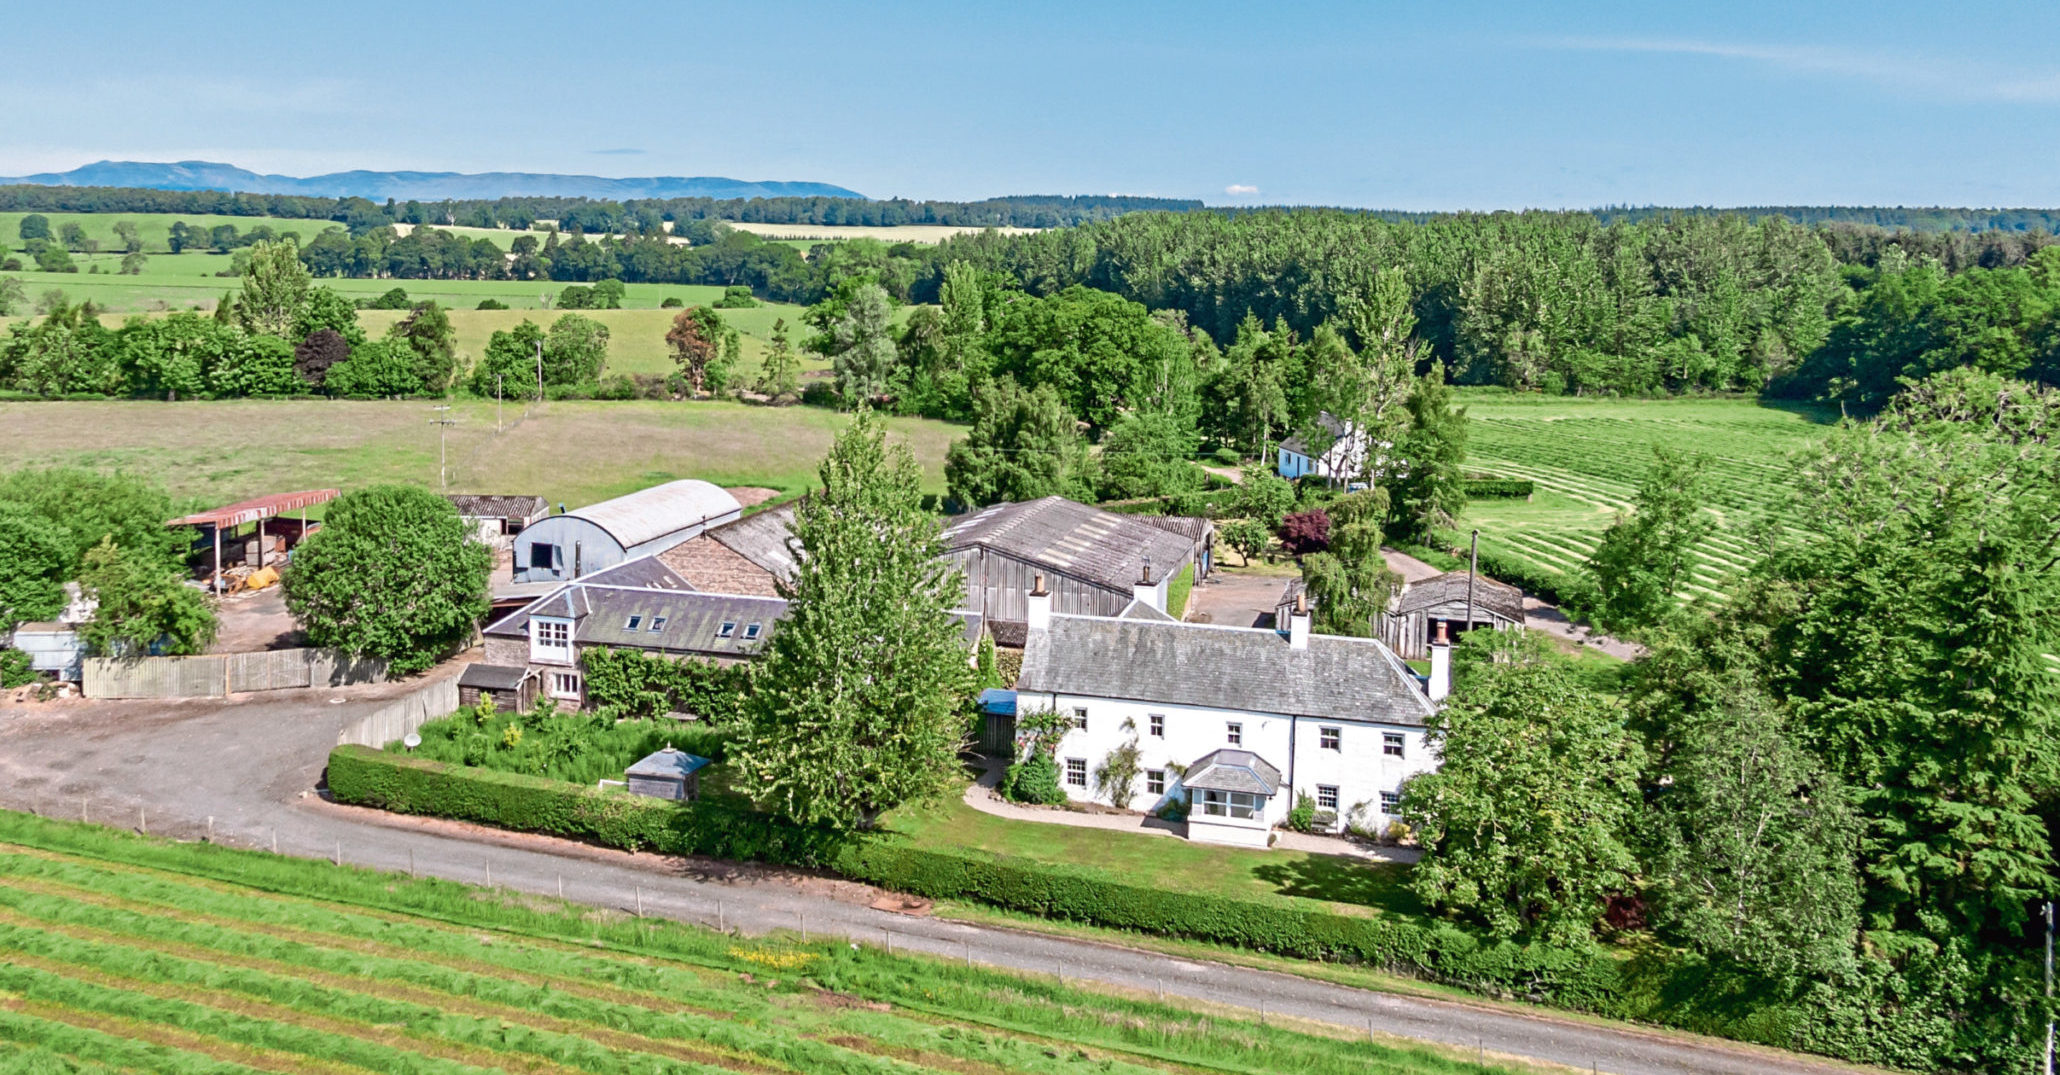 Whitebank extends to more than 60ha and comes with a 300-year-old farmhouse.